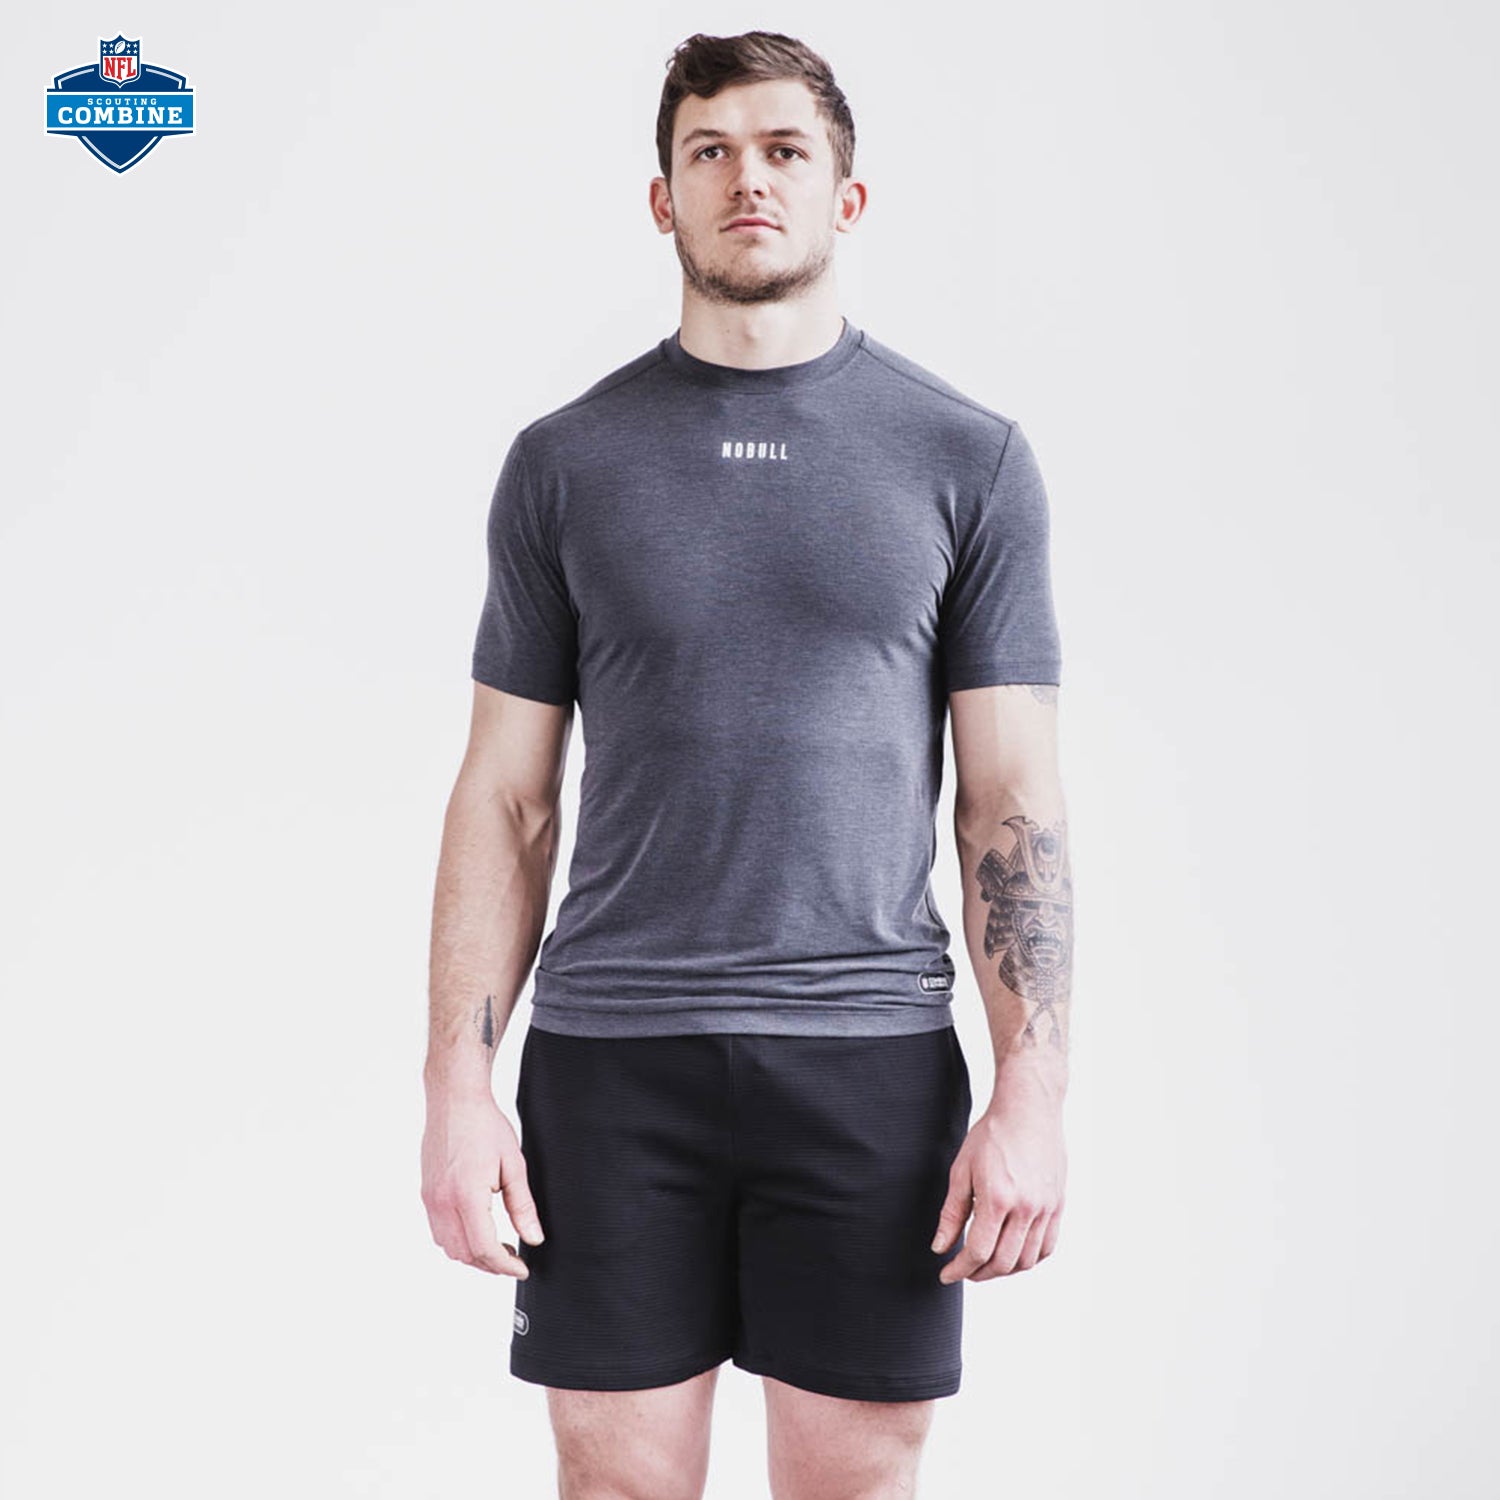 NFL announces NOBULL, CrossFit Games sponsor, as new apparel supplier for  2023 scouting combine 